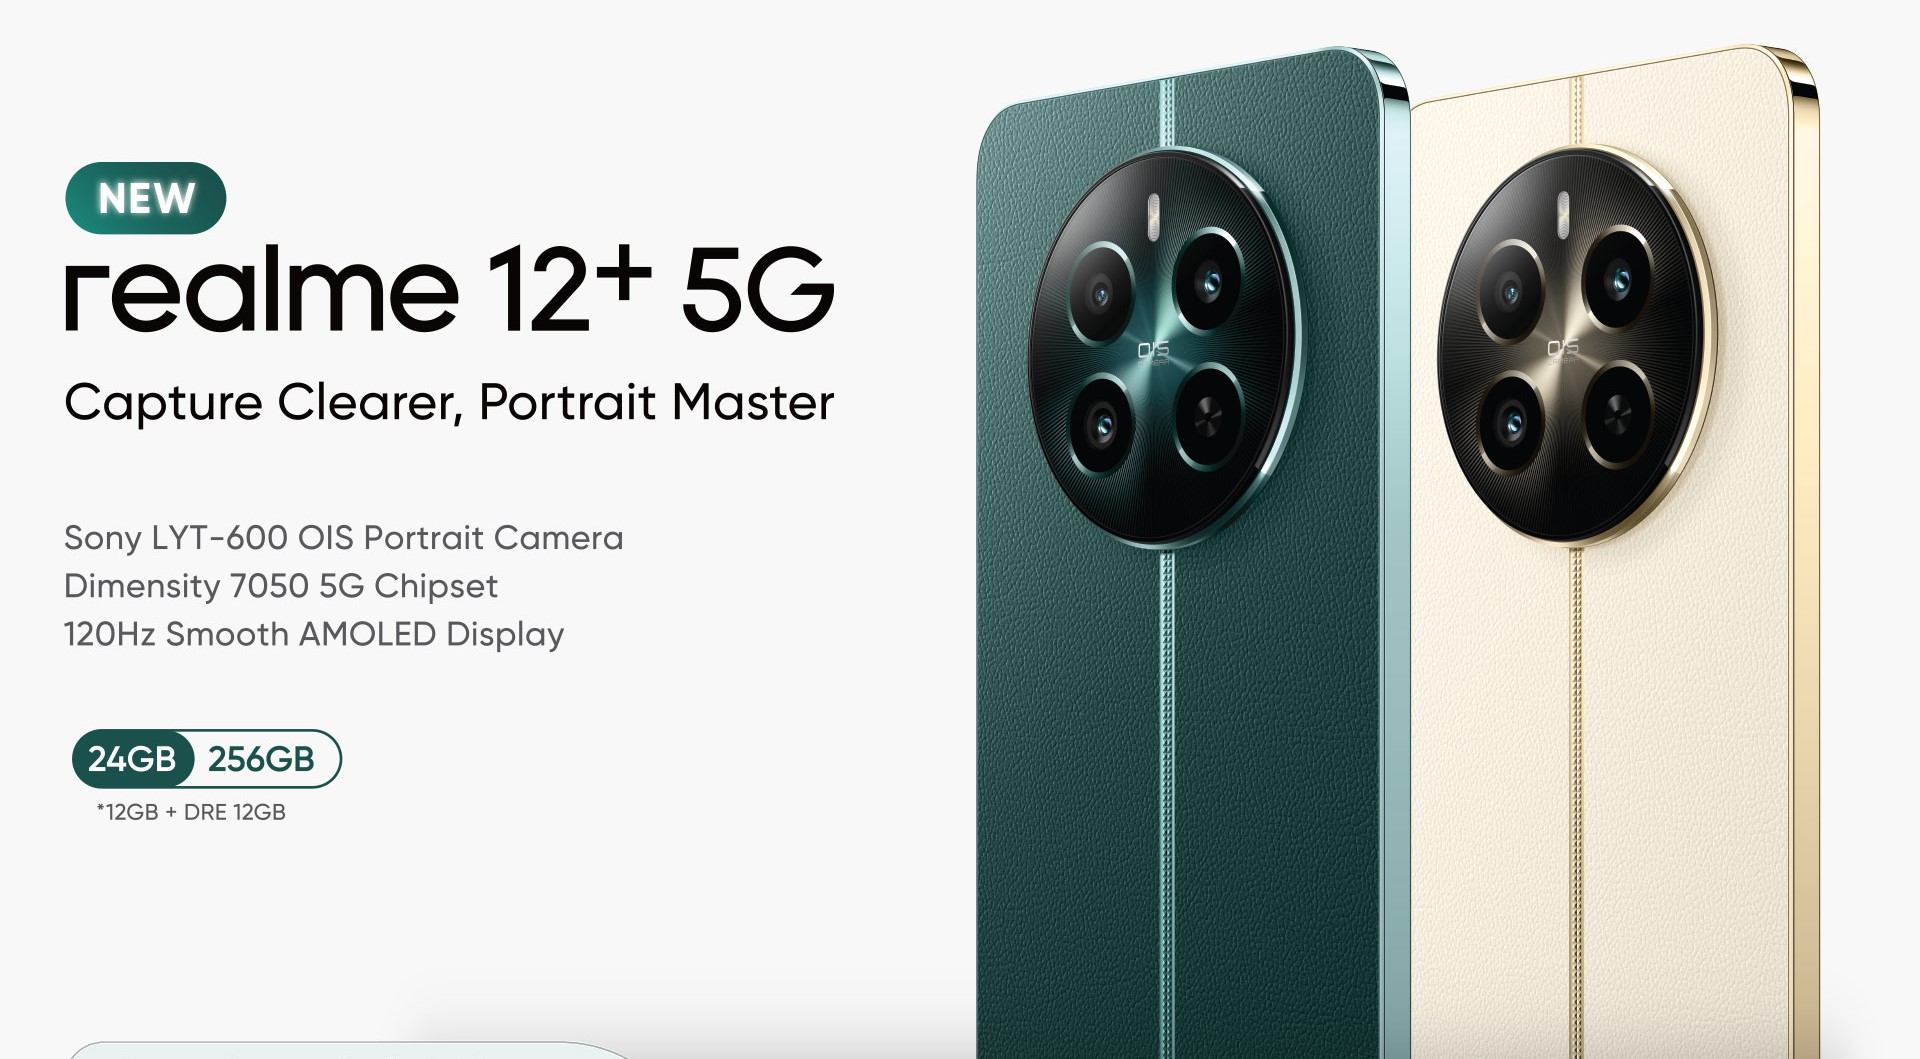 Technology News, Know Leaked Specifications and Features of Upcoming Realme  12 Pro 5G and Realme 12 Pro Plus 5G